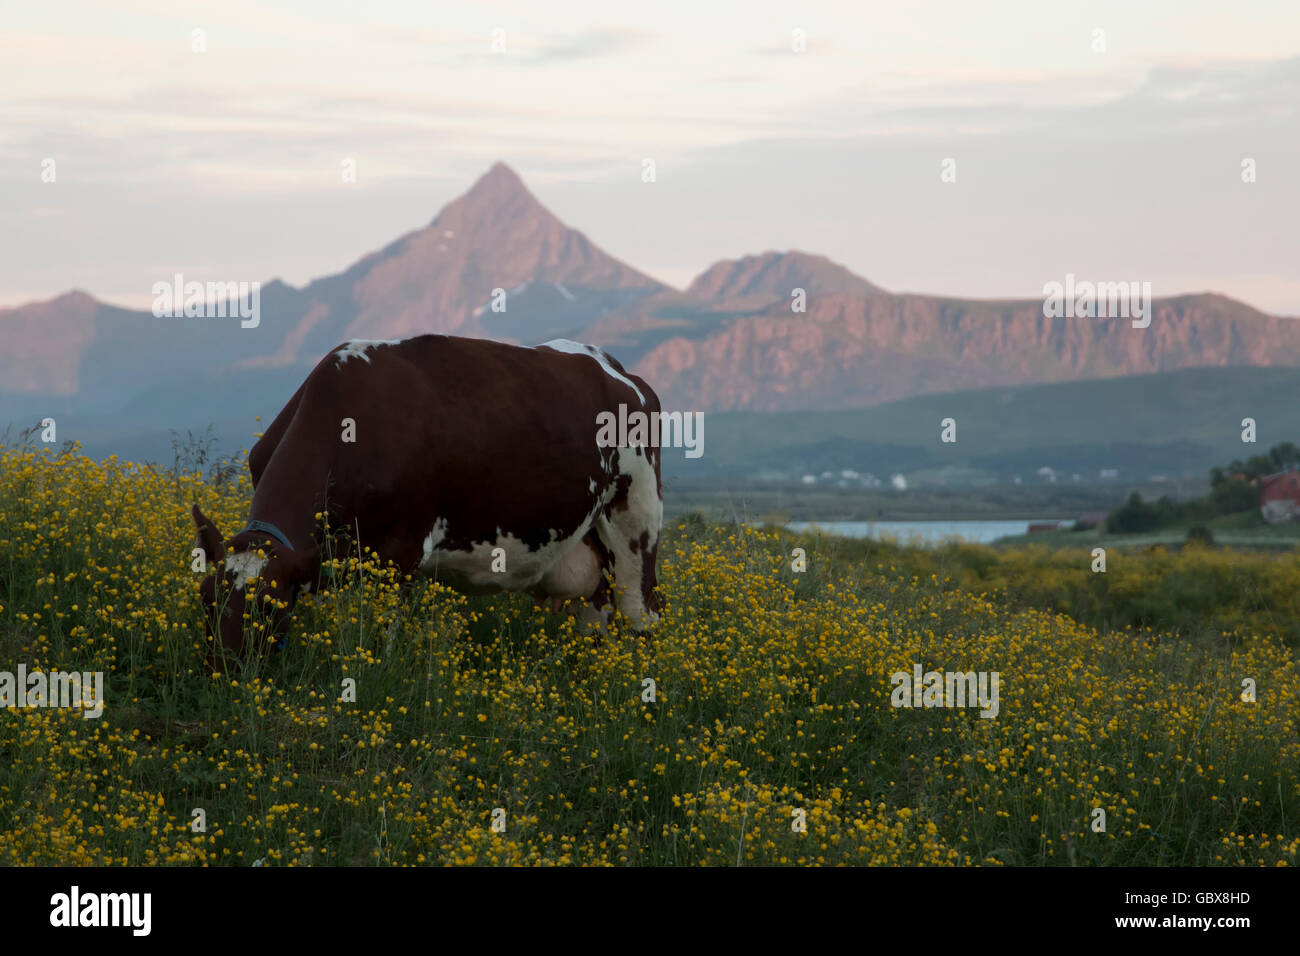 Cow grazing in field with mountain in background. Stock Photo